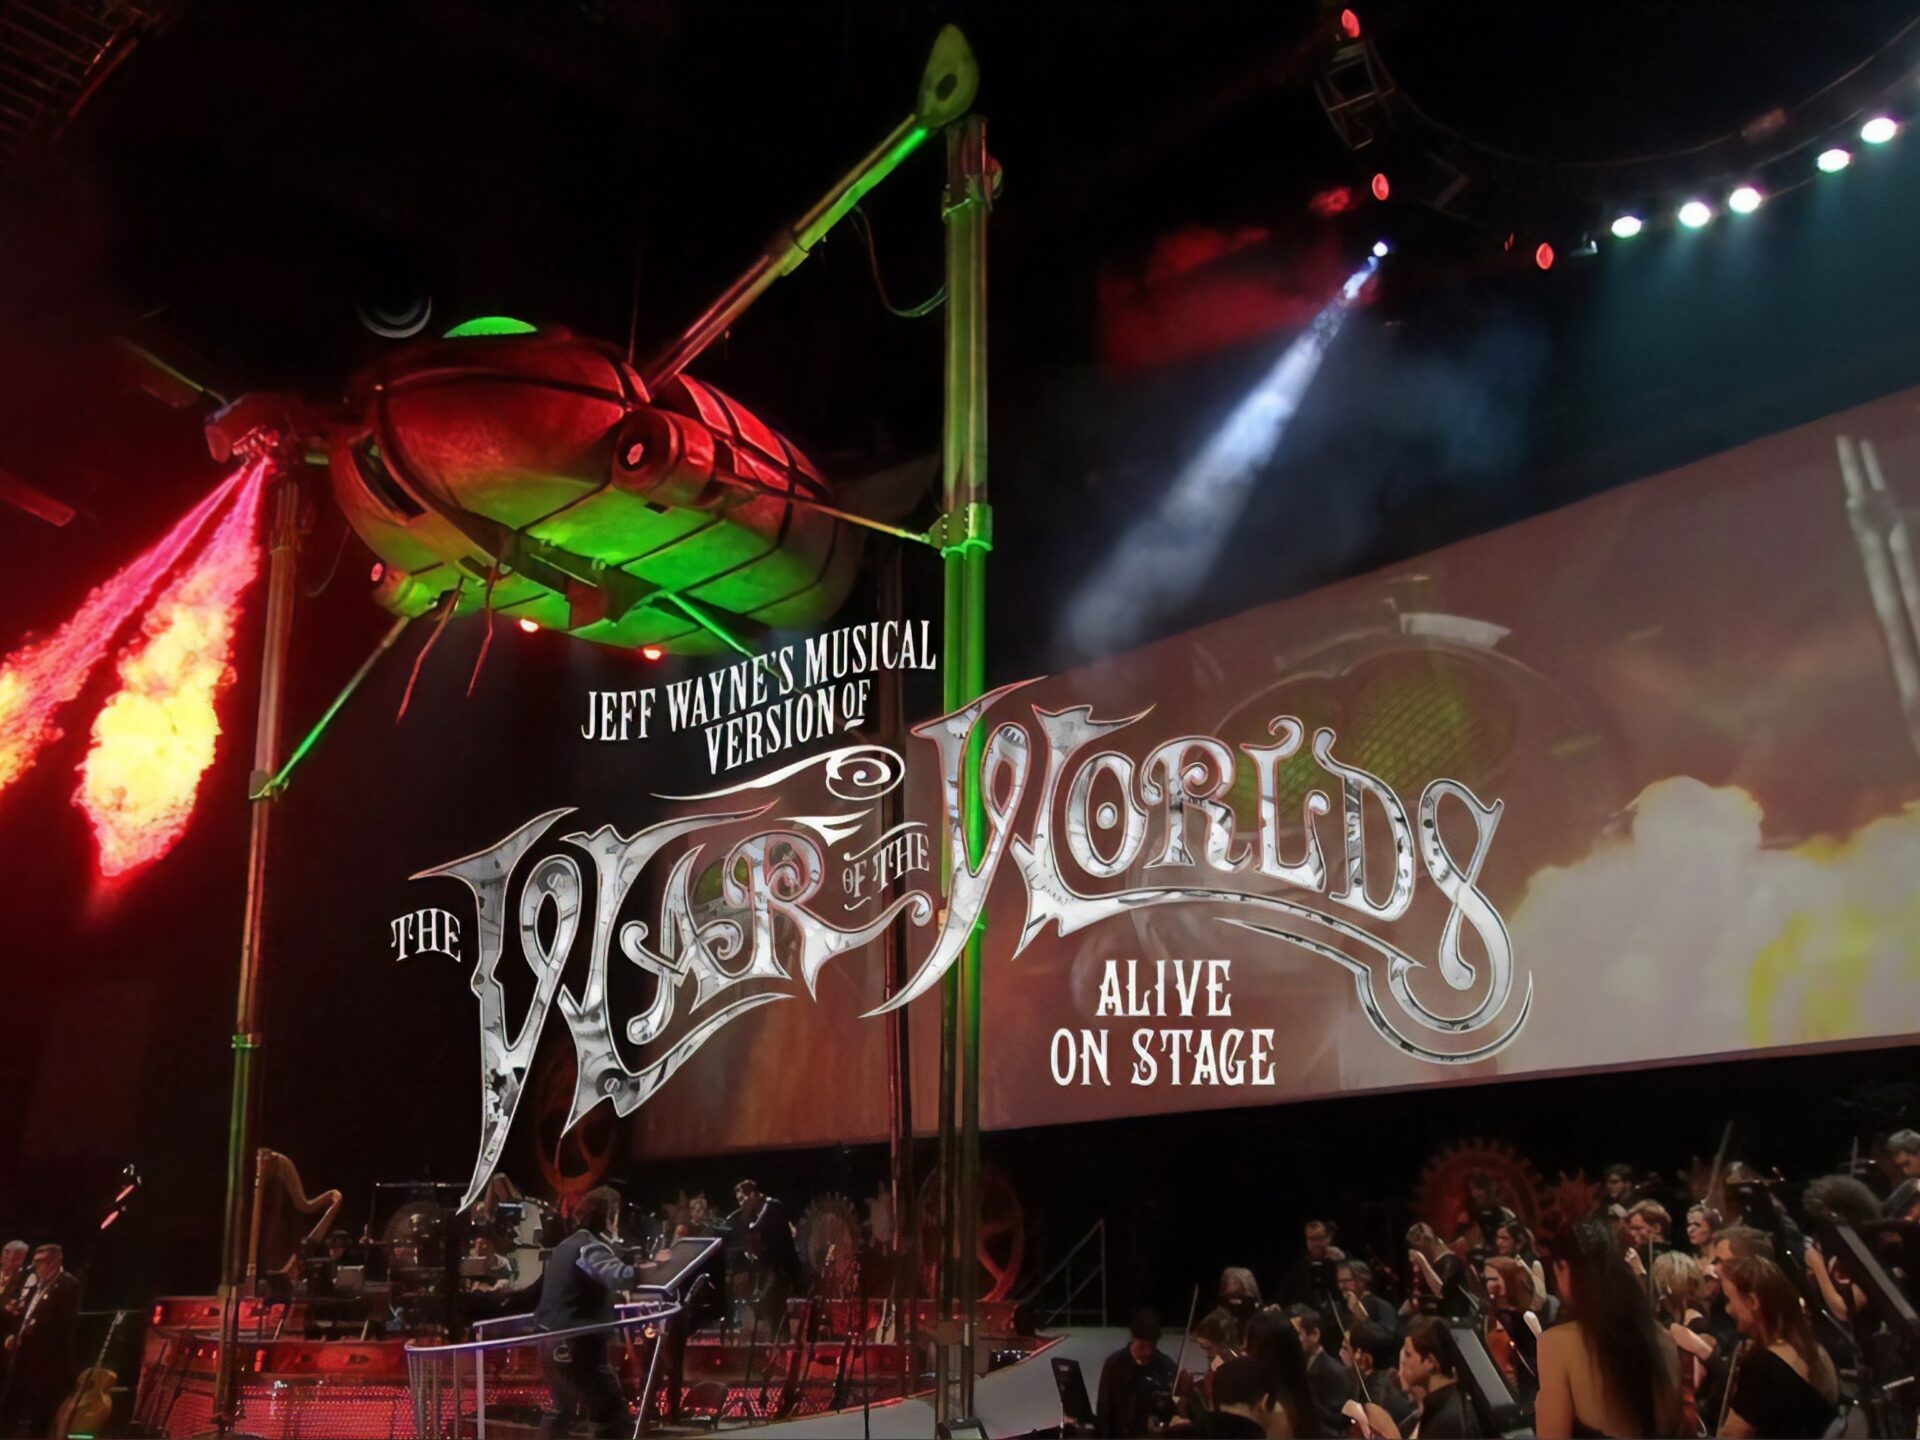 Jeff Wayne's Musical version of The War of the Worlds